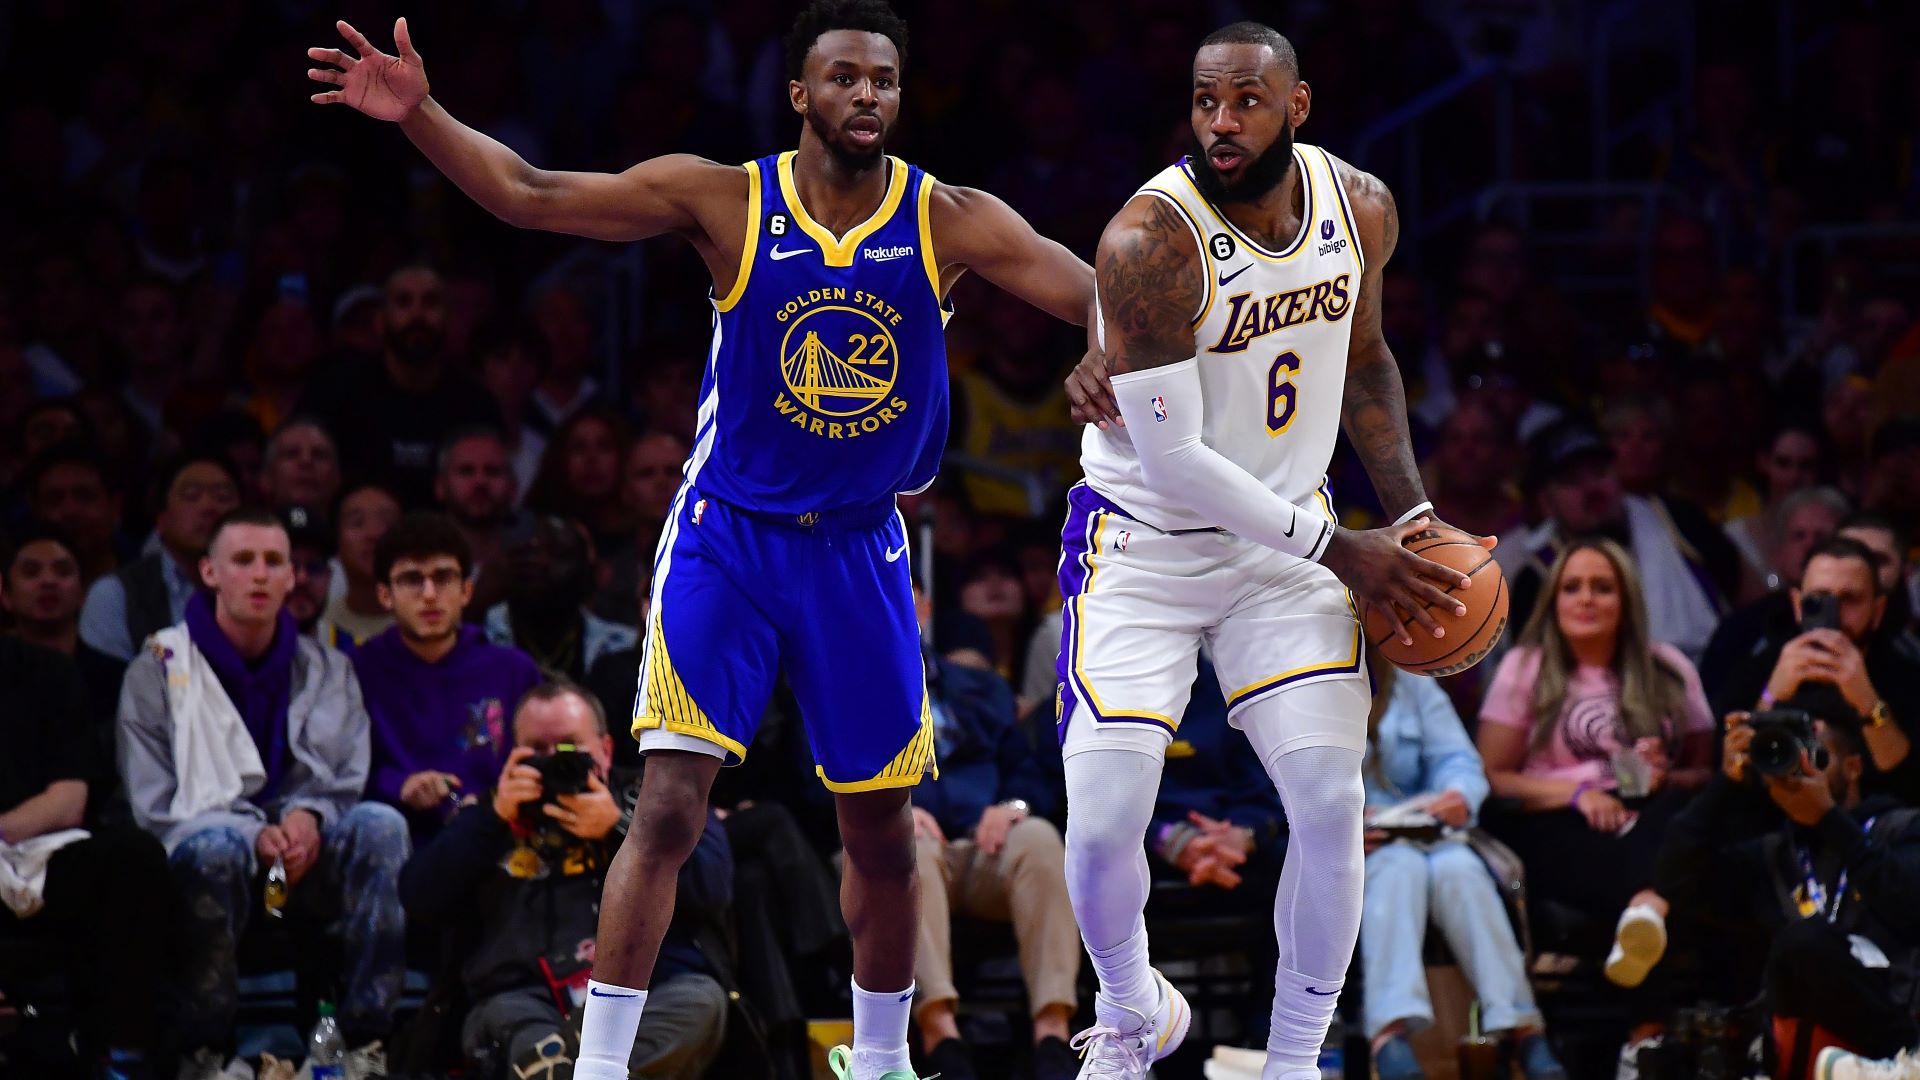 How to Watch the NBA Playoffs today - May 4: Lakers v. Warriors